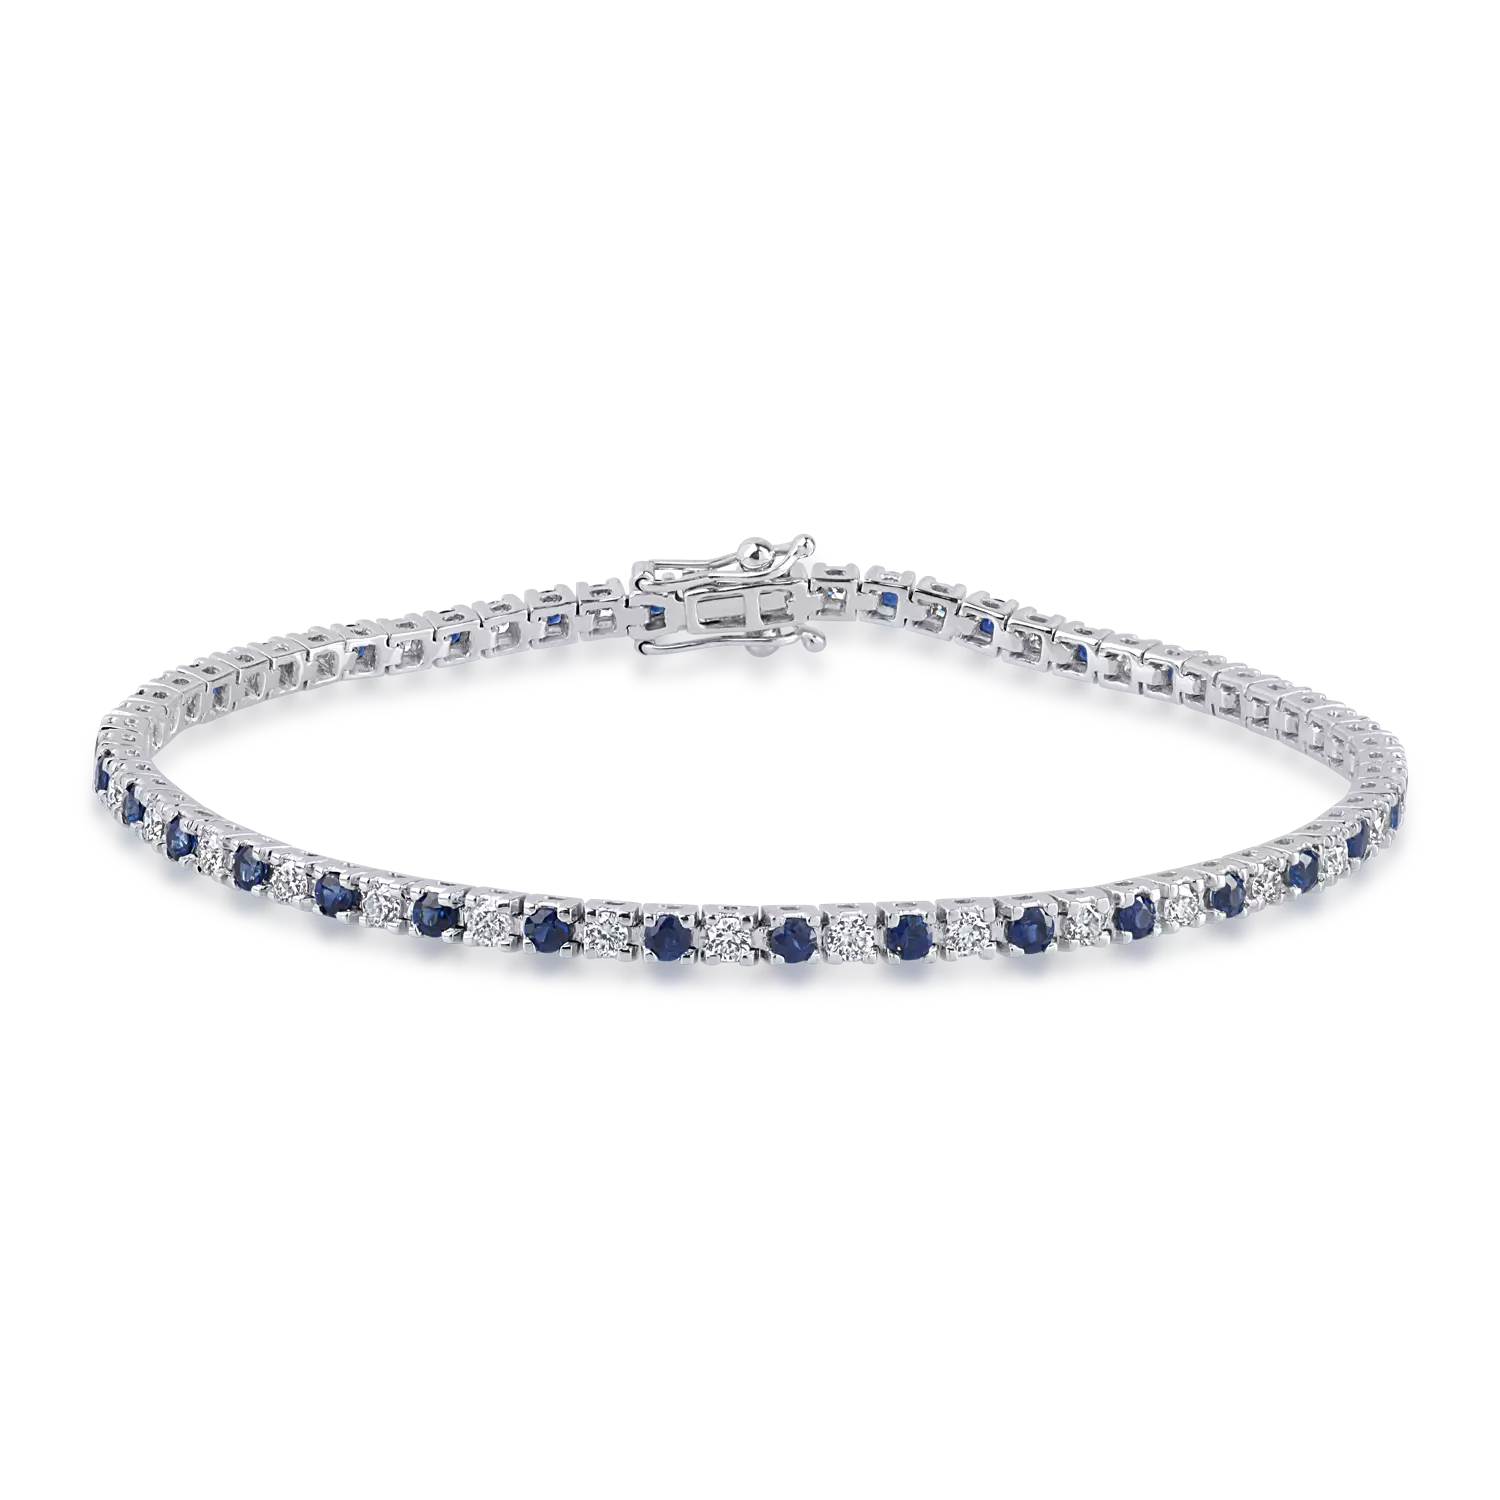 White gold tennis bracelet with 1.8ct sapphires and 1.3ct diamonds